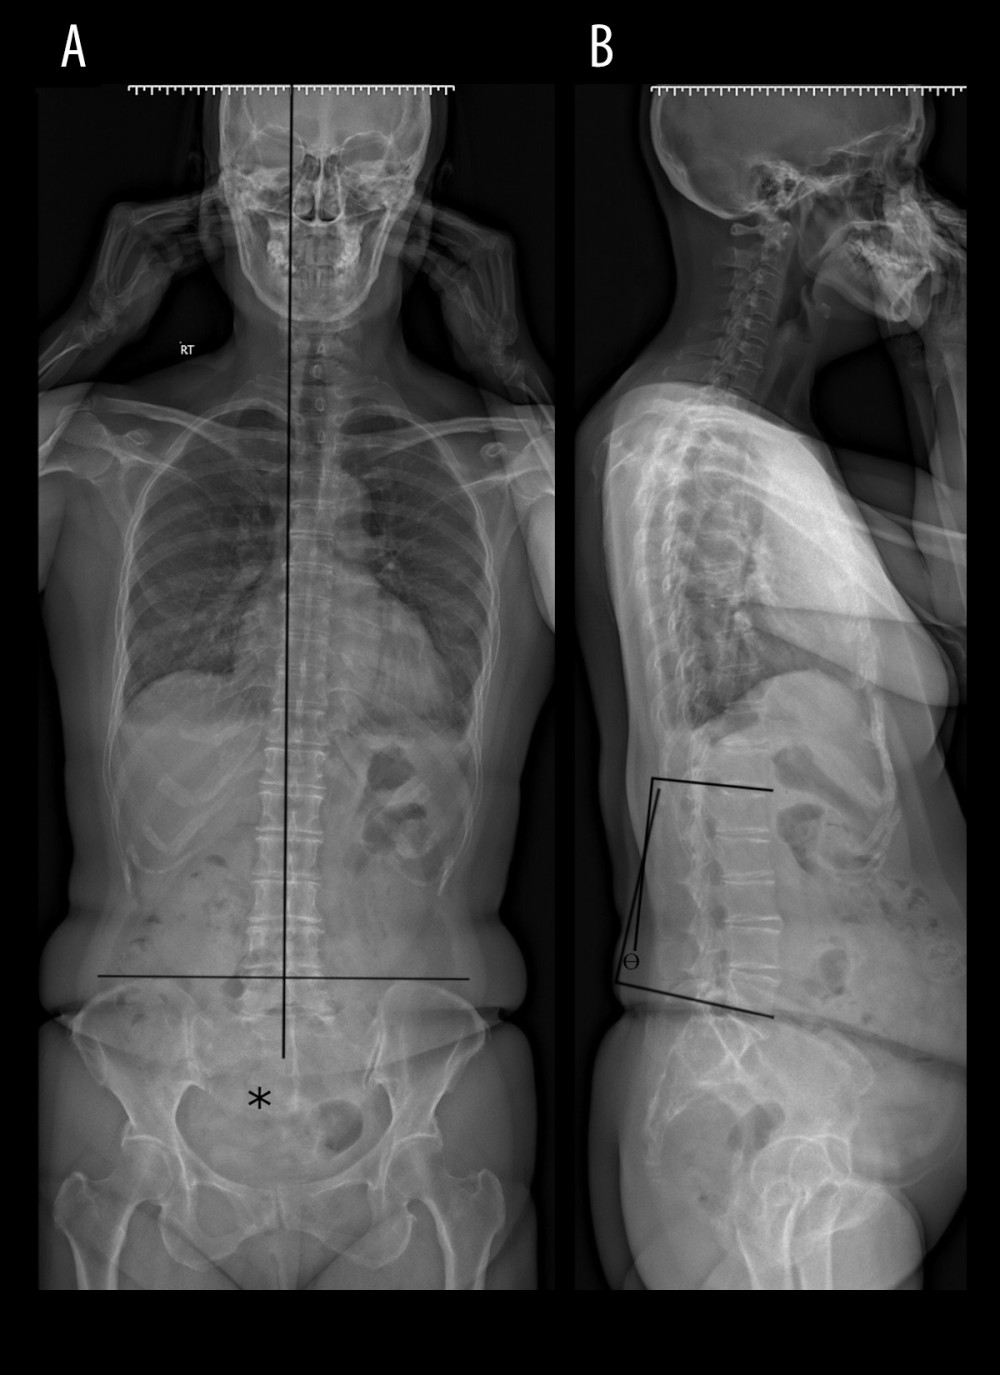 Full-spine radiographs. The anteroposterior view (A) shows an abnormal coronal balance with the patient’s spine deviating to the left of the central sacral vertebral line (the vertical line bisecting the first sacral segment and perpendicular to the iliac crests). The aggressive sacral hemangioma (*) is visible spanning the sacrum, more prominently on the patient’s right side. There is no appreciable scoliotic curvature. The lateral view (B) shows the lumbar lordosis angle (θ) of 7° calculated using a 4-line L1–L5 Cobb method (normal is 20–45°). Thoracic hypokyphosis (flattening) is also evident, while the patient’s C7 plumb line intersected the sacrum, indicating a neutral sagittal balance (measurements not shown). Mild spondylosis is apparent in the lower thoracic and lumbar spine.